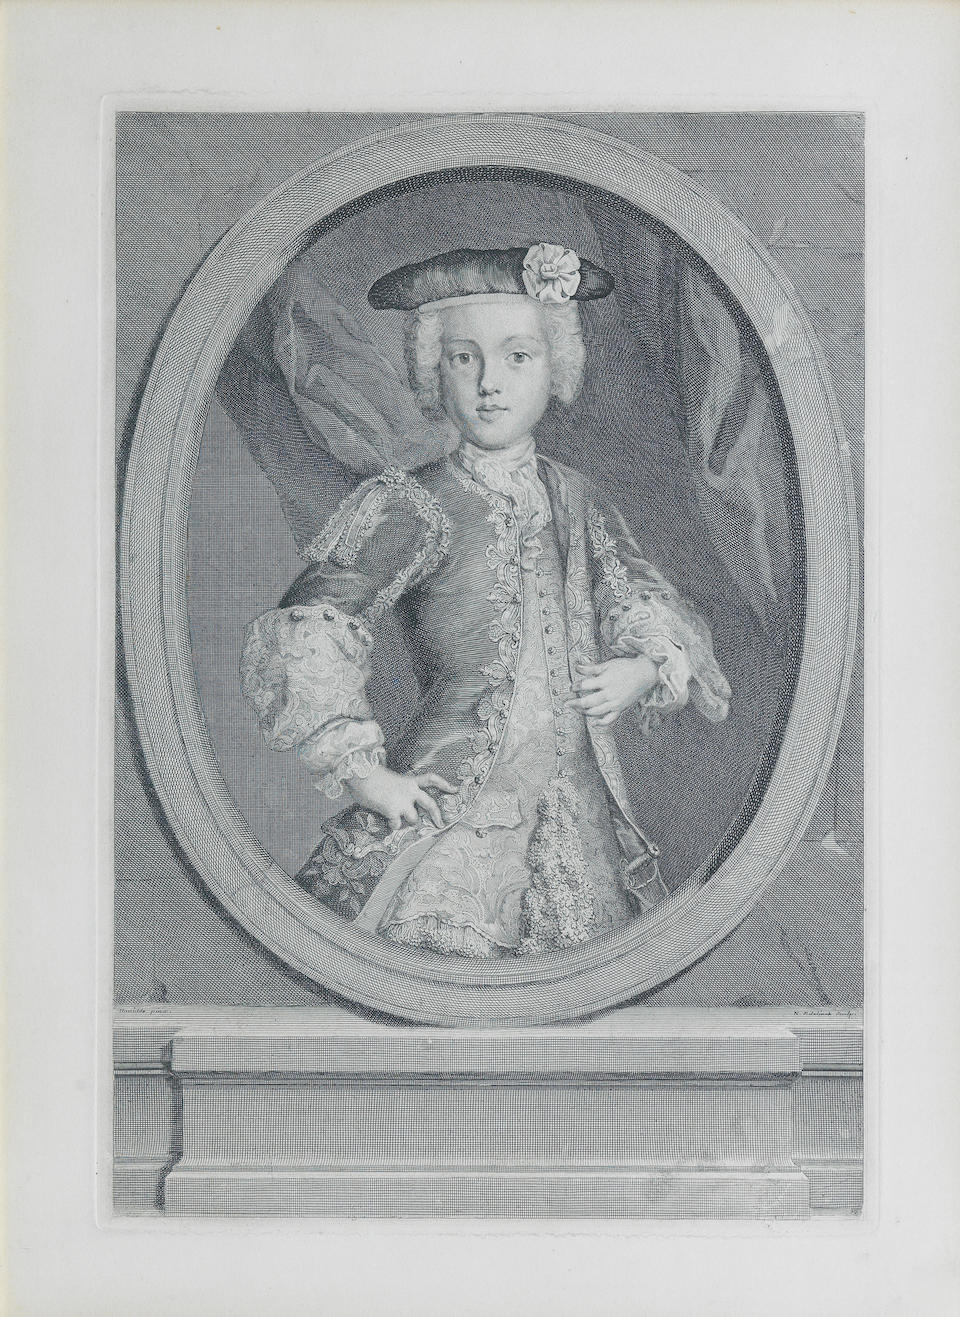 A portrait engraving of Charles Edward Stuart as a boy after David, engraved by Nicolas Edelinck...